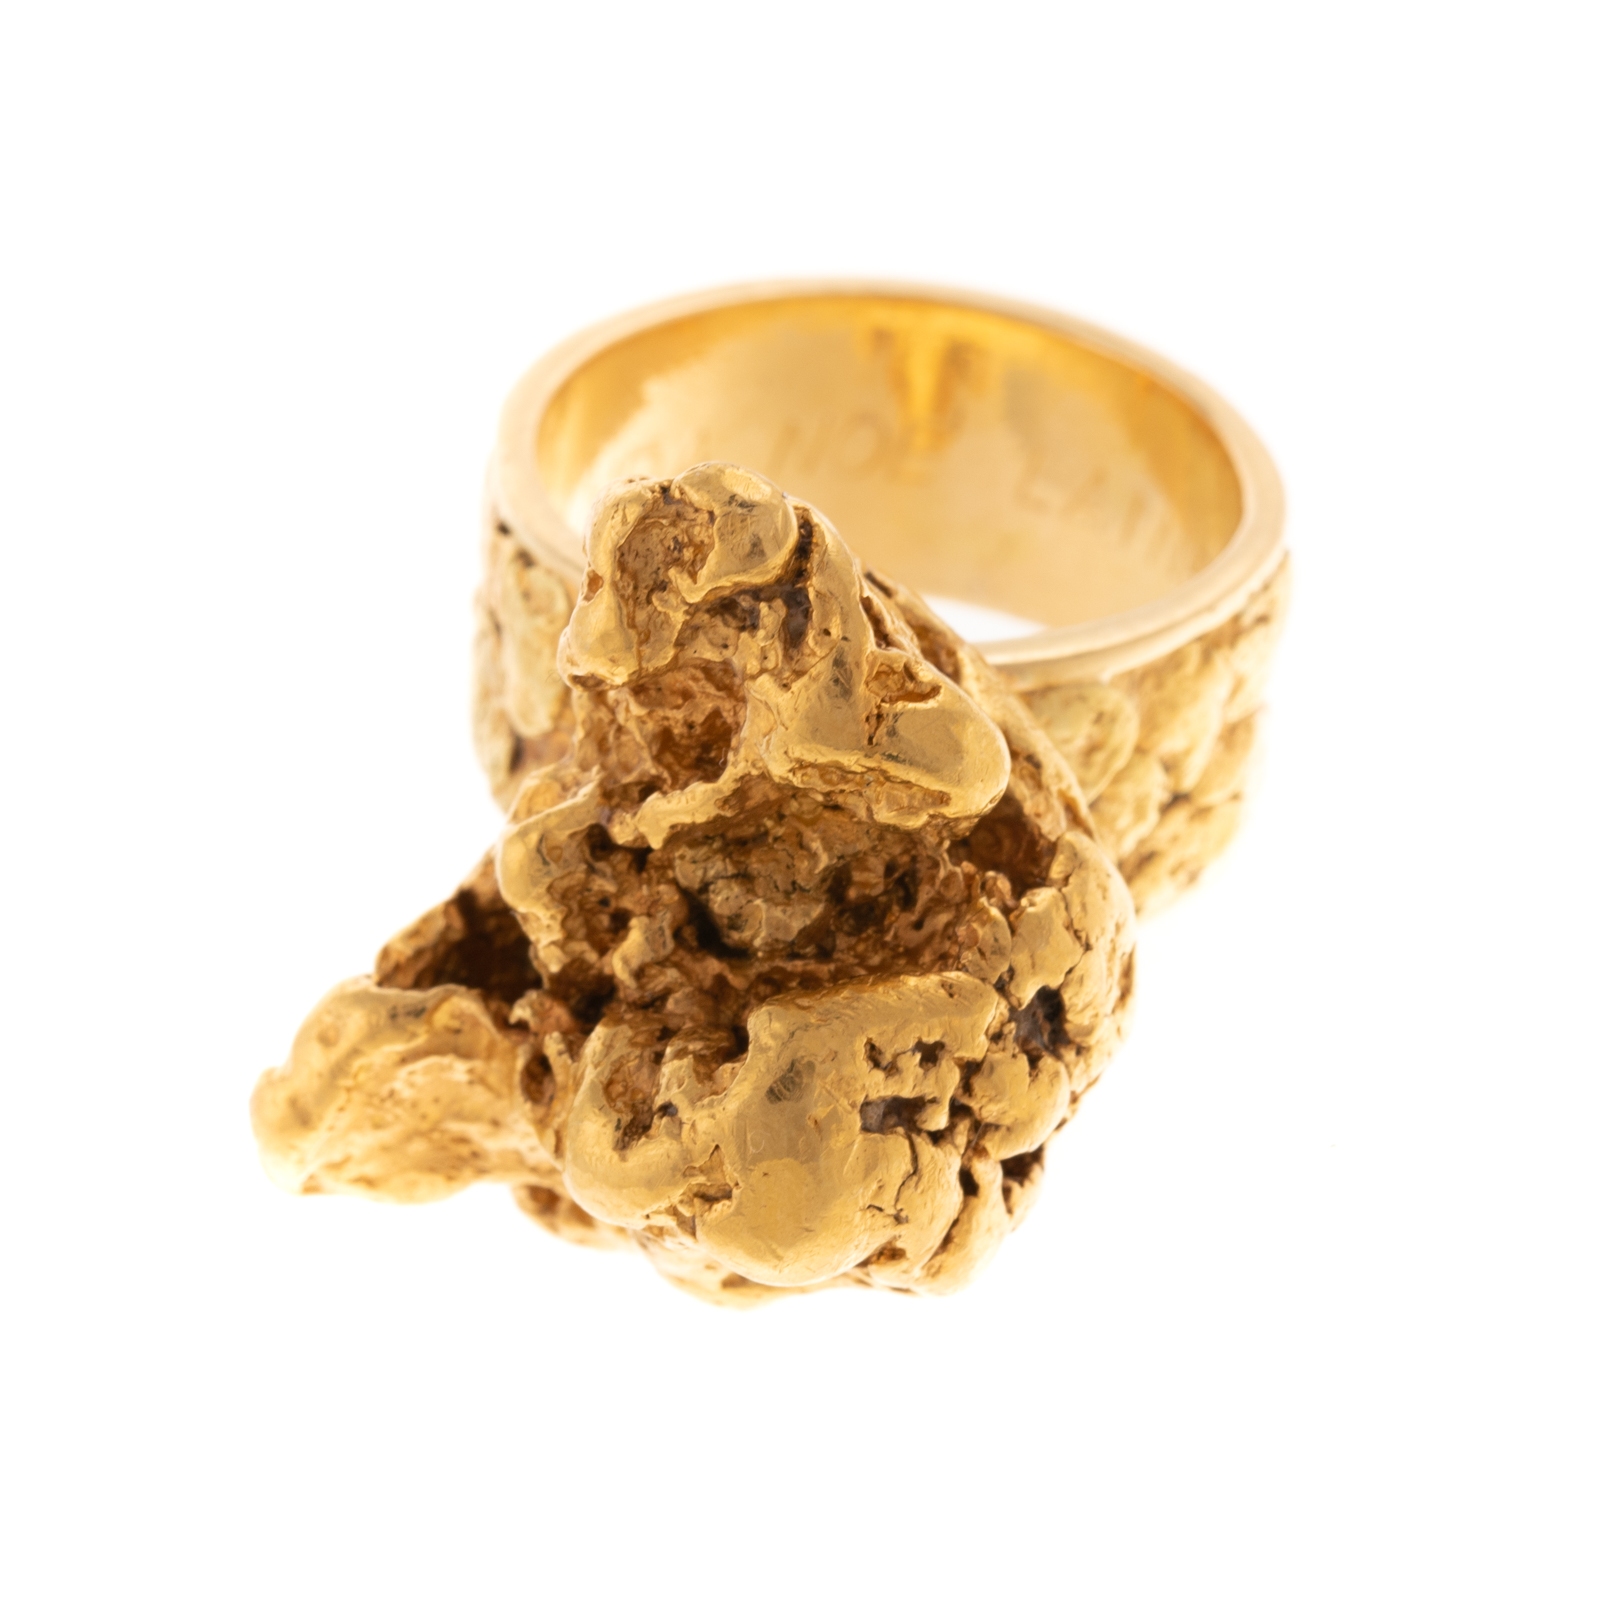 A SOLID 22K YELLOW GOLD NUGGET